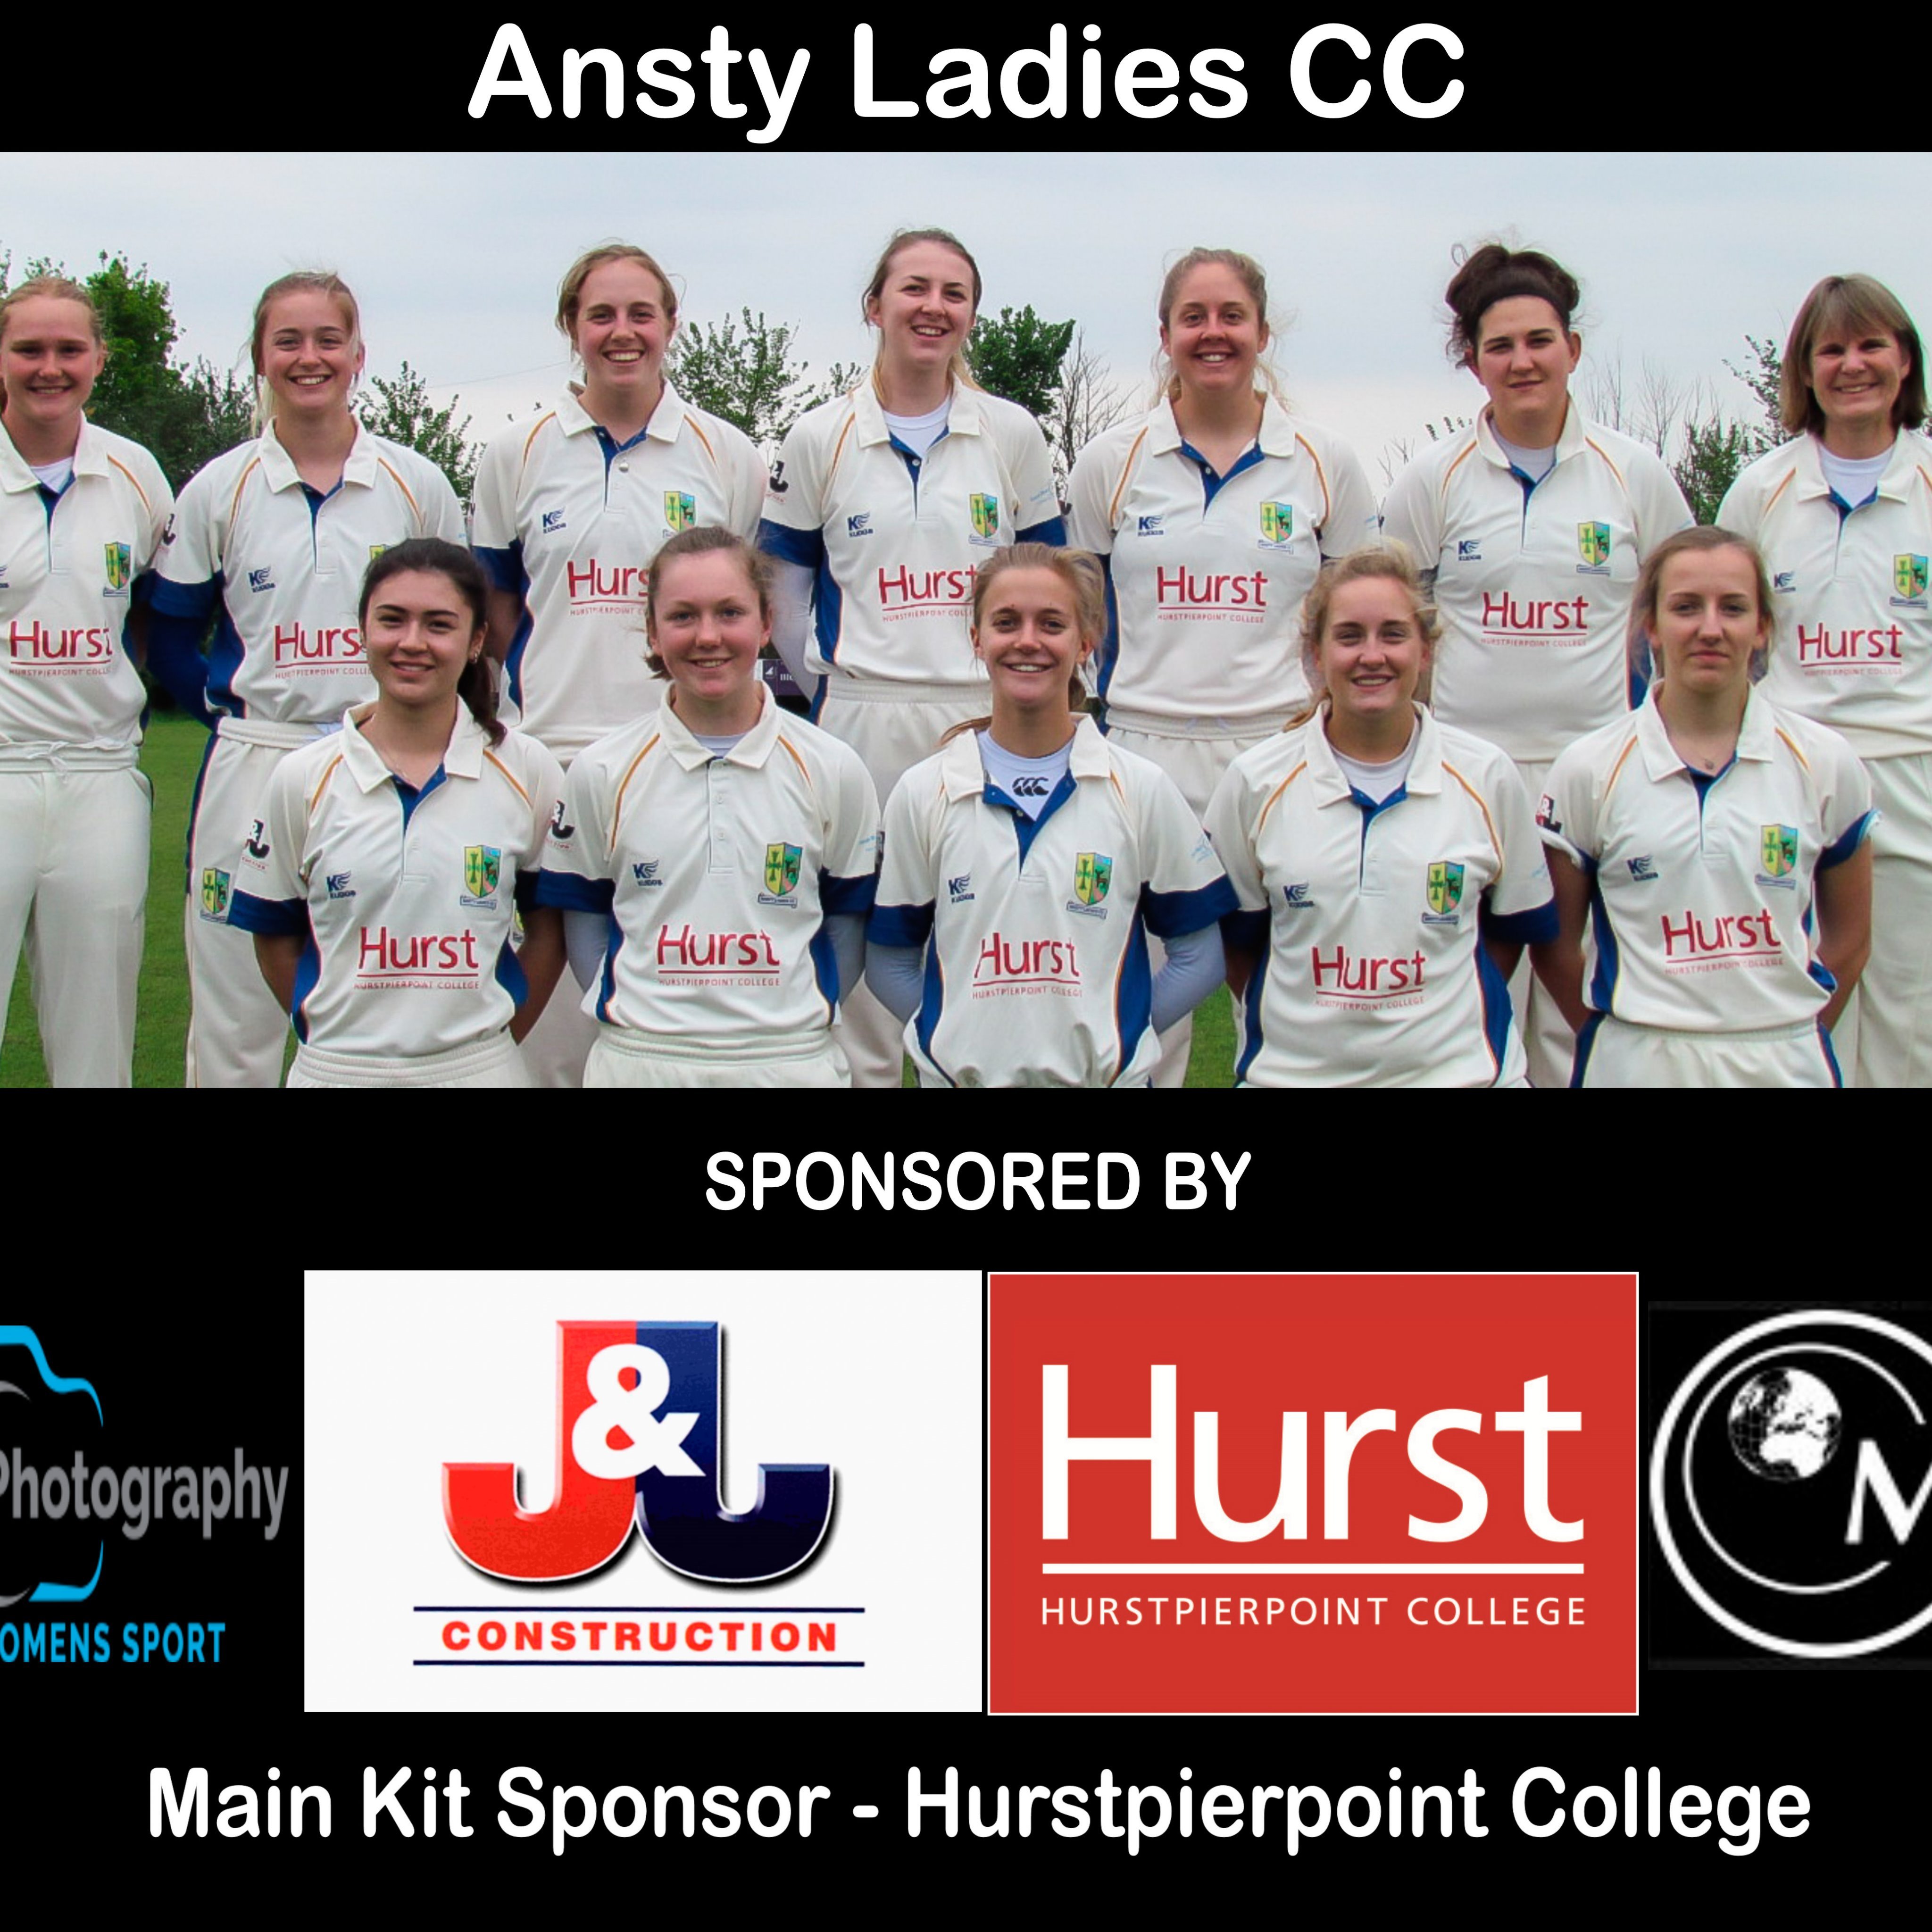 Providing matchday updates of Ansty Ladies CC games